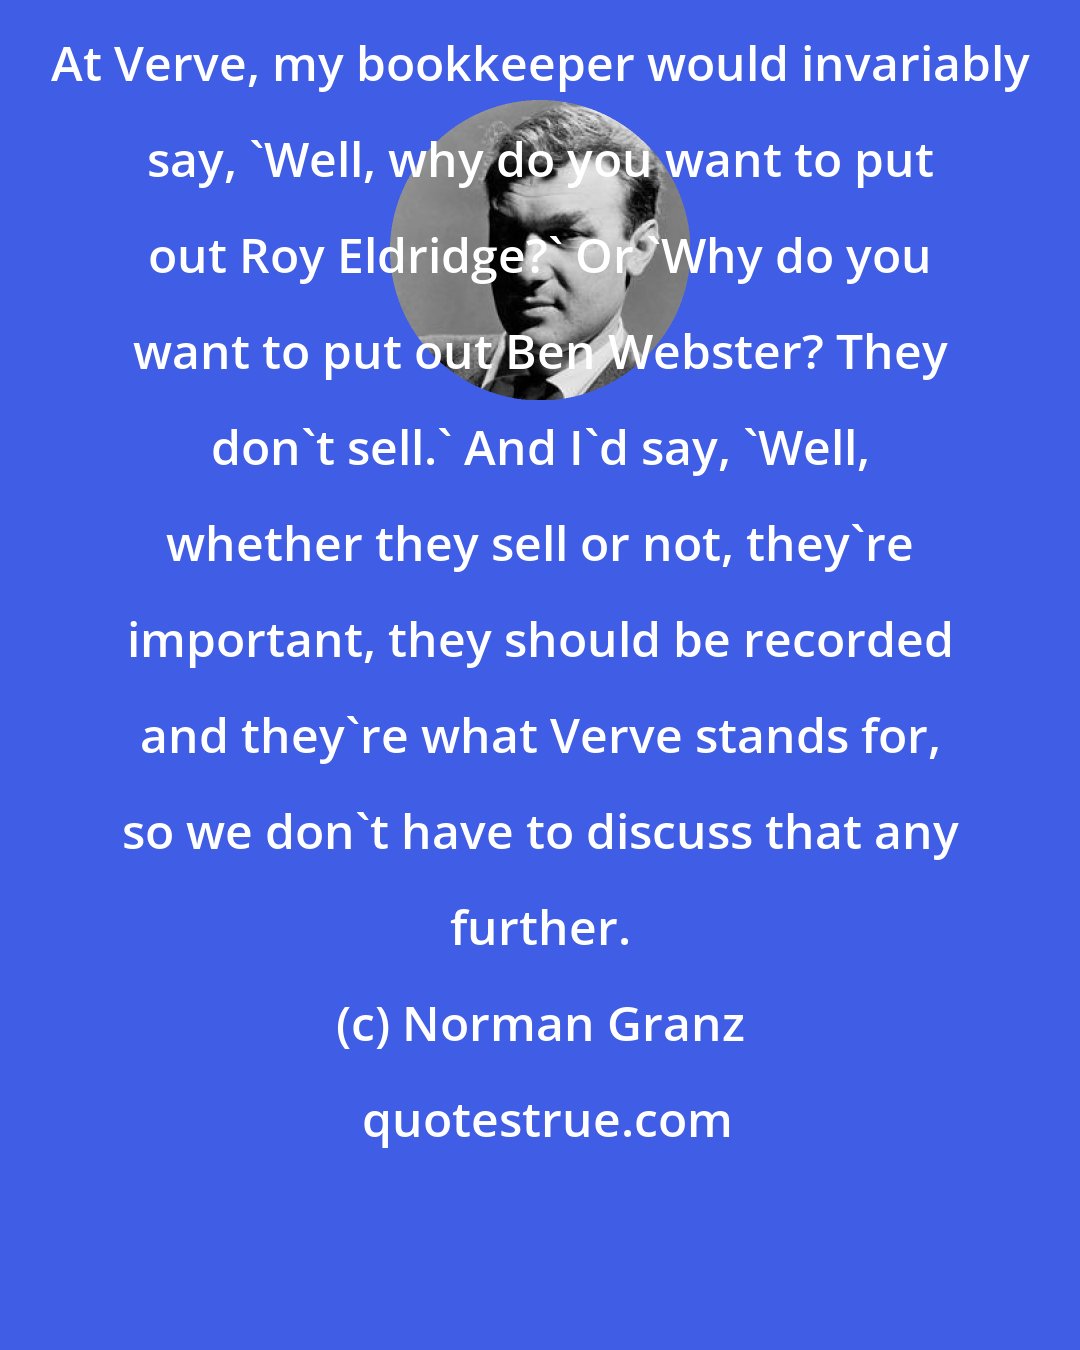 Norman Granz: At Verve, my bookkeeper would invariably say, 'Well, why do you want to put out Roy Eldridge?' Or 'Why do you want to put out Ben Webster? They don't sell.' And I'd say, 'Well, whether they sell or not, they're important, they should be recorded and they're what Verve stands for, so we don't have to discuss that any further.